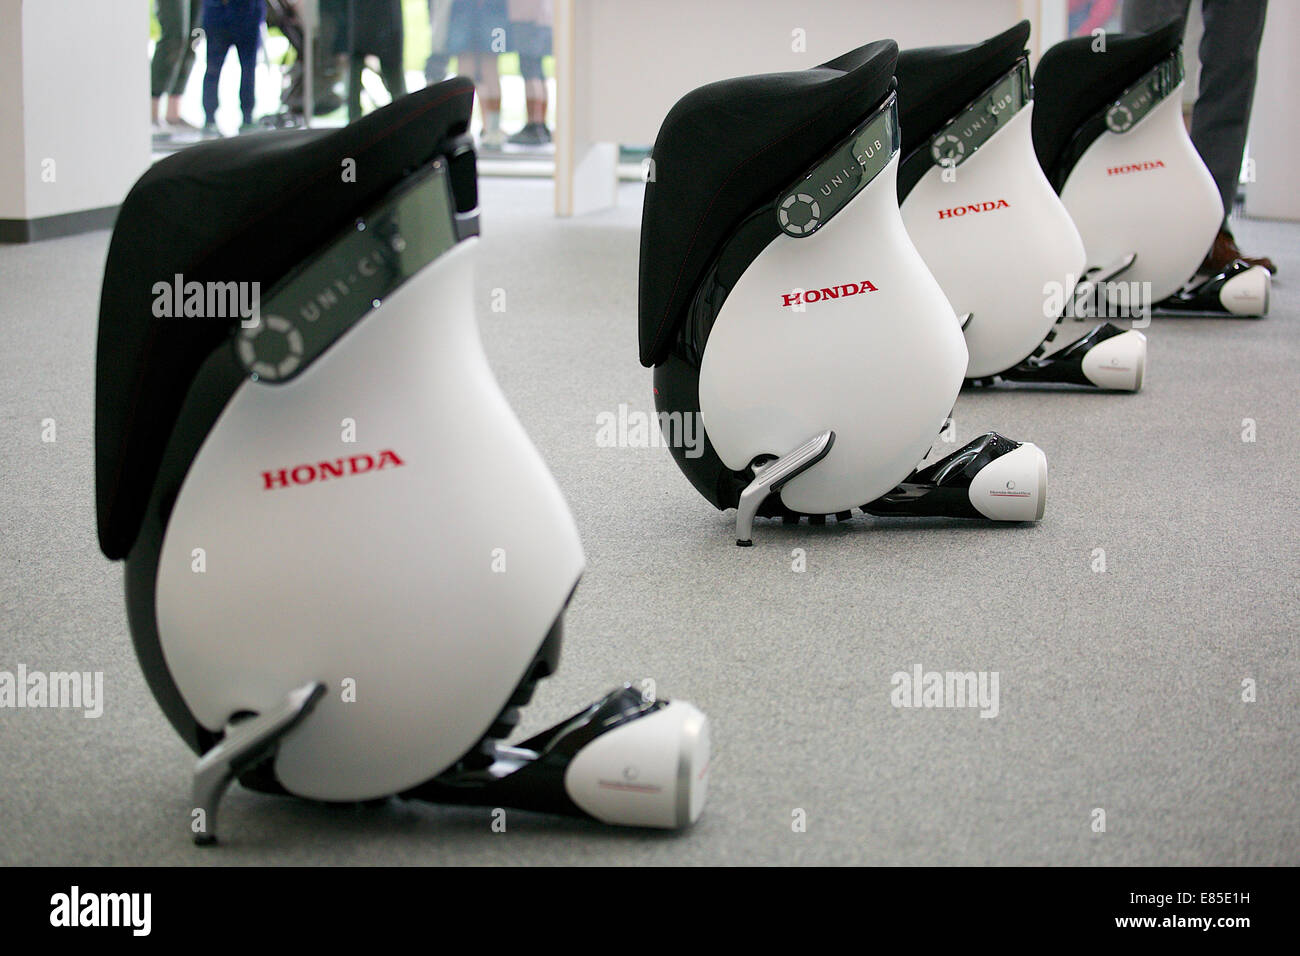 Tokyo, Japan. 1st October, 2014. For the first time visitors can drive the Honda's personal mobility inside the National Museum of Emerging Science and Innovation (Miraikan) on October 1, 2014 in Tokyo, Japan. The rental cost is 620 JPY (5.66 USD) for adults and 210 JPY (1.92USD) for under 18 years from October 1 to March 31, 2015. According to the Honda staff UNI-CUB B can be used inside the buildings such as museums, airports, universities and other business places. Credit:  Rodrigo Reyes Marin/AFLO/Alamy Live News Stock Photo